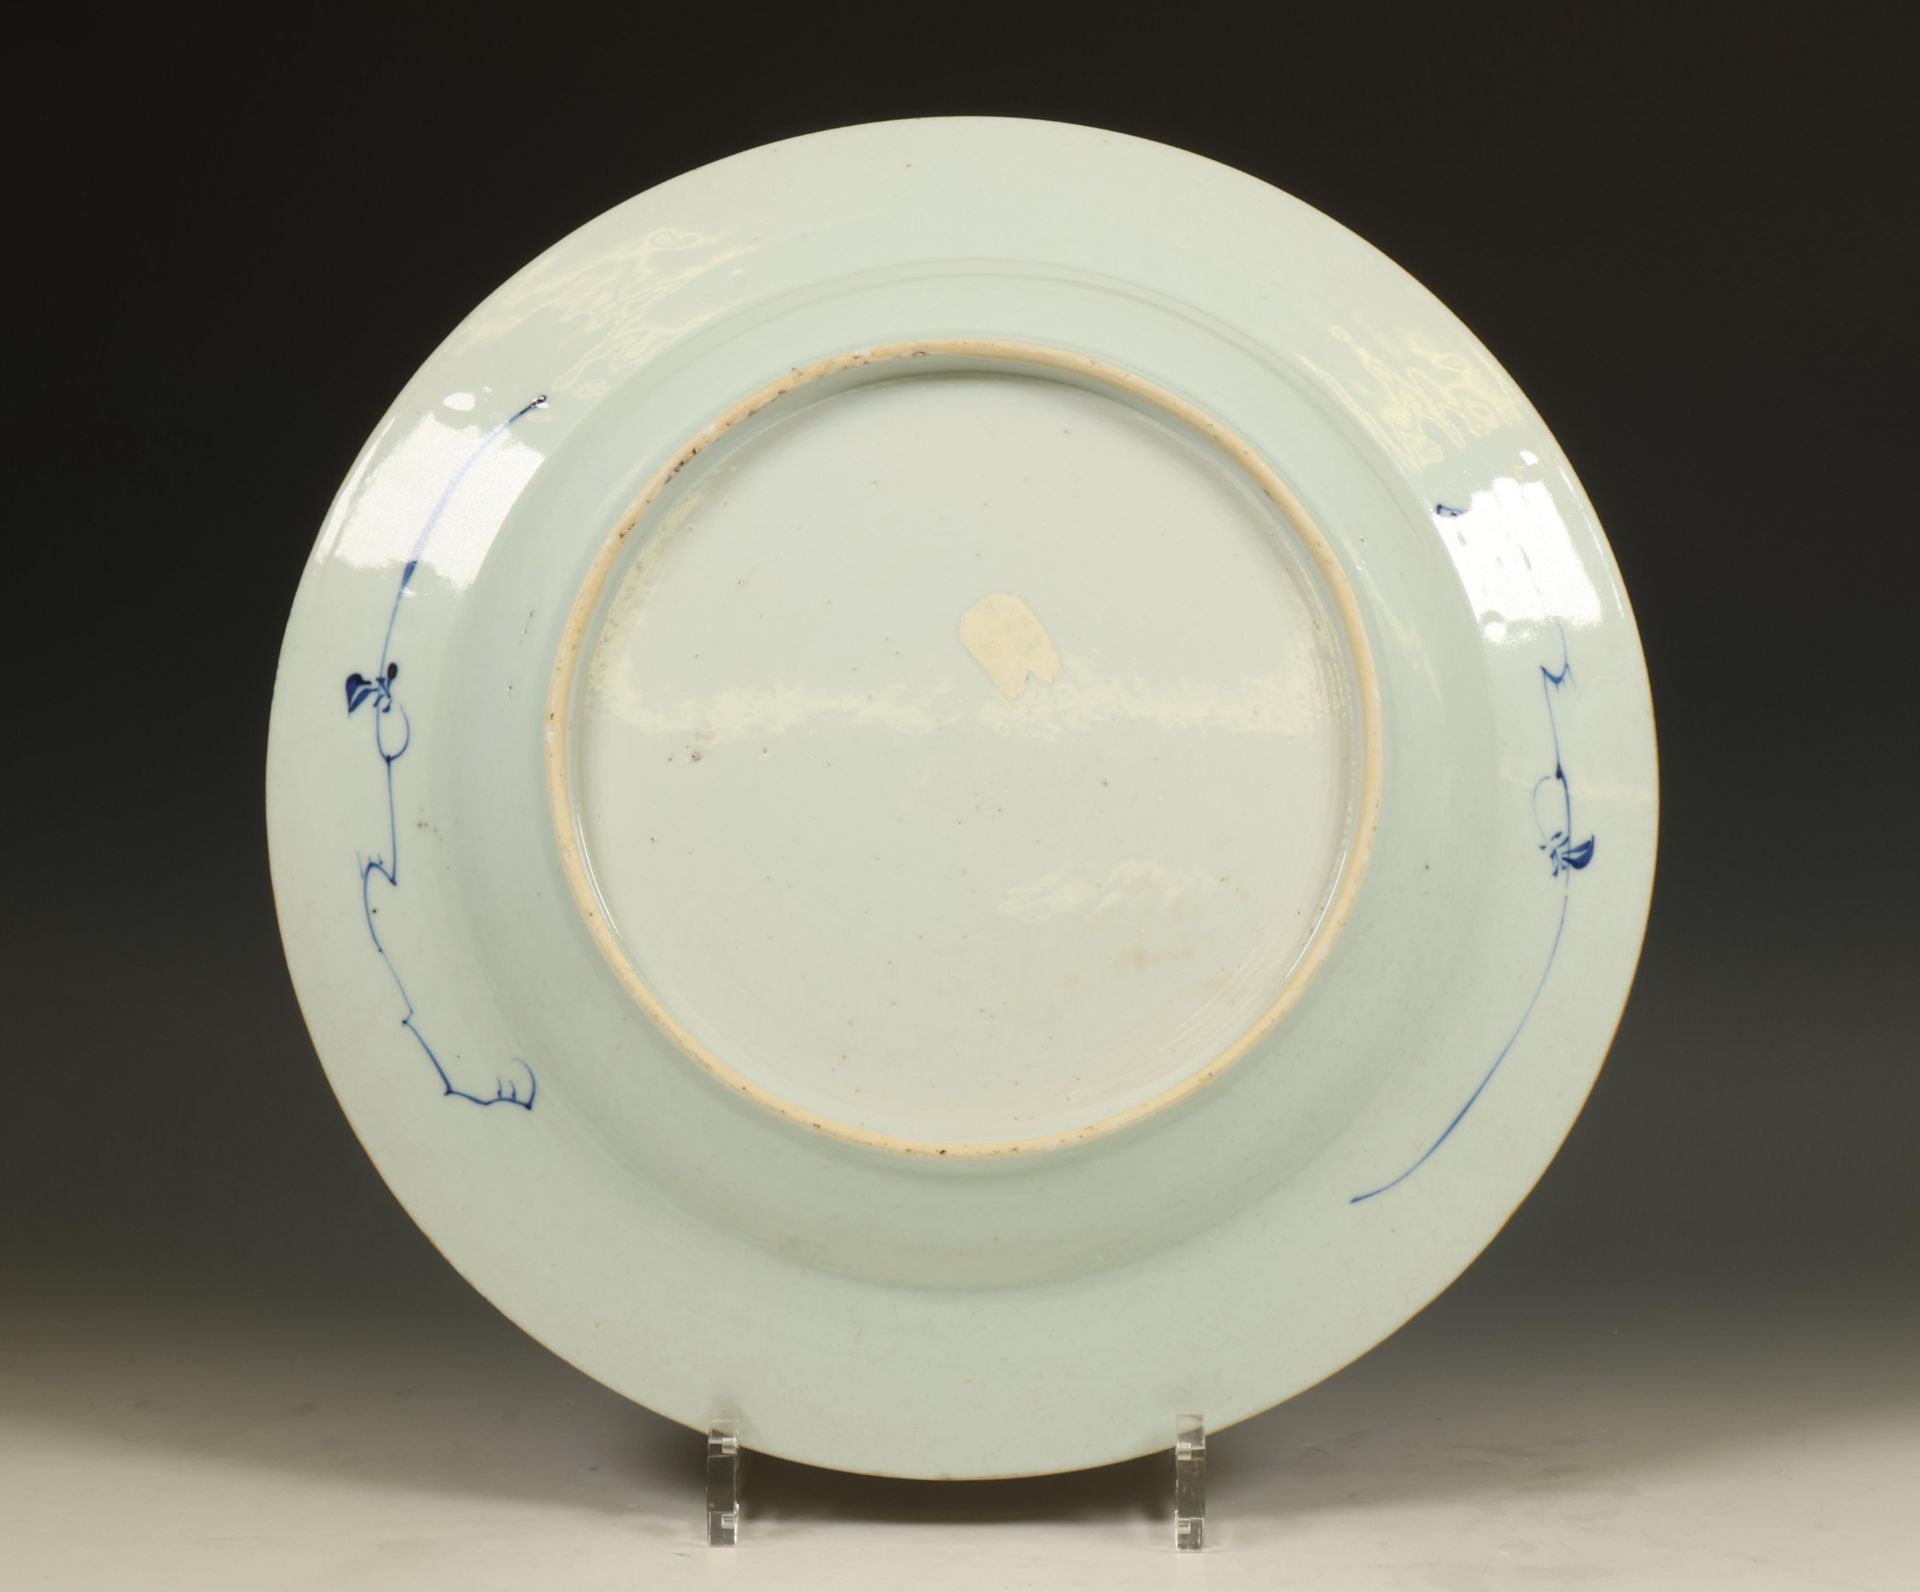 China, blue and white porcelain dish, late 18th century, - Image 2 of 2